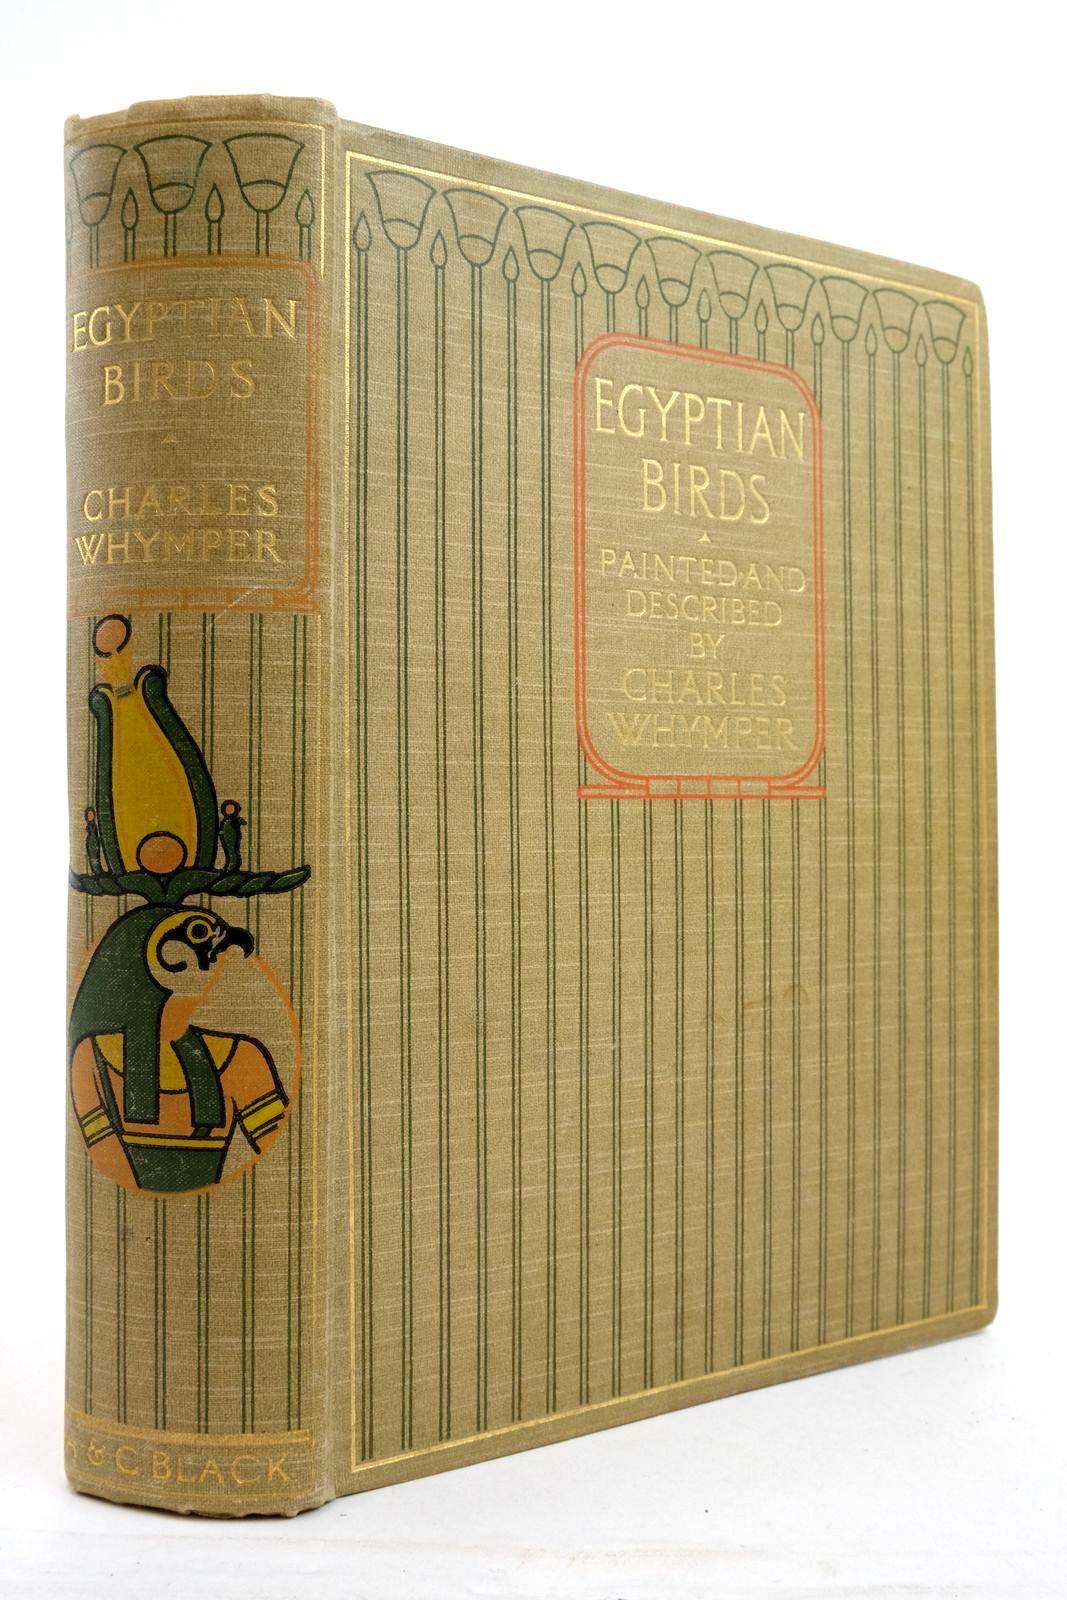 Photo of EGYPTIAN BIRDS written by Whymper, Charles illustrated by Whymper, Charles published by Adam & Charles Black (STOCK CODE: 2137437)  for sale by Stella & Rose's Books